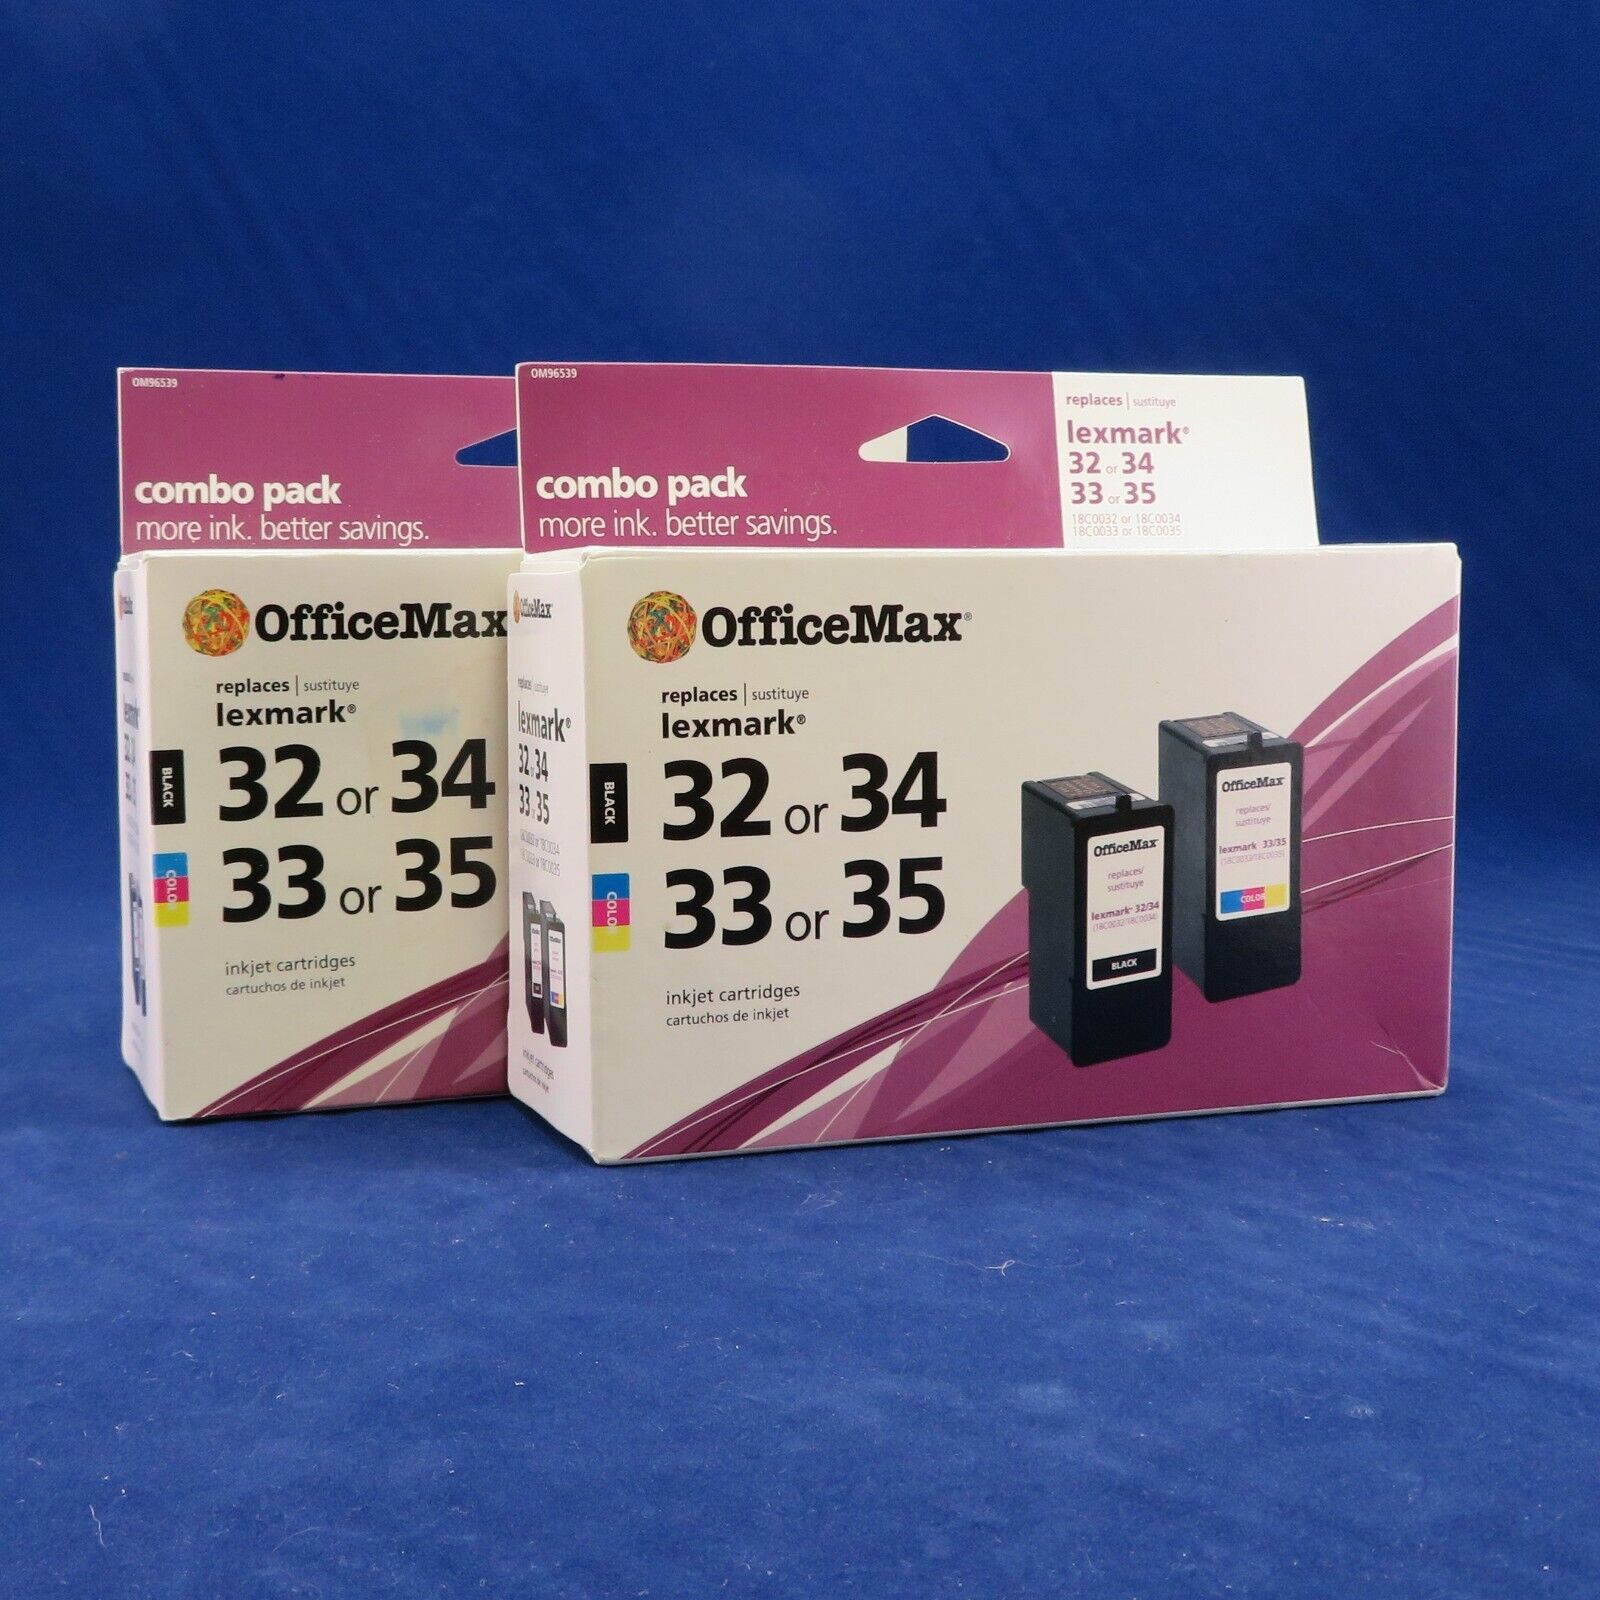 2 - Office Max Replaces Lexmark Ink Cartridges Black 32 or 33 color 33 or 35 NOS